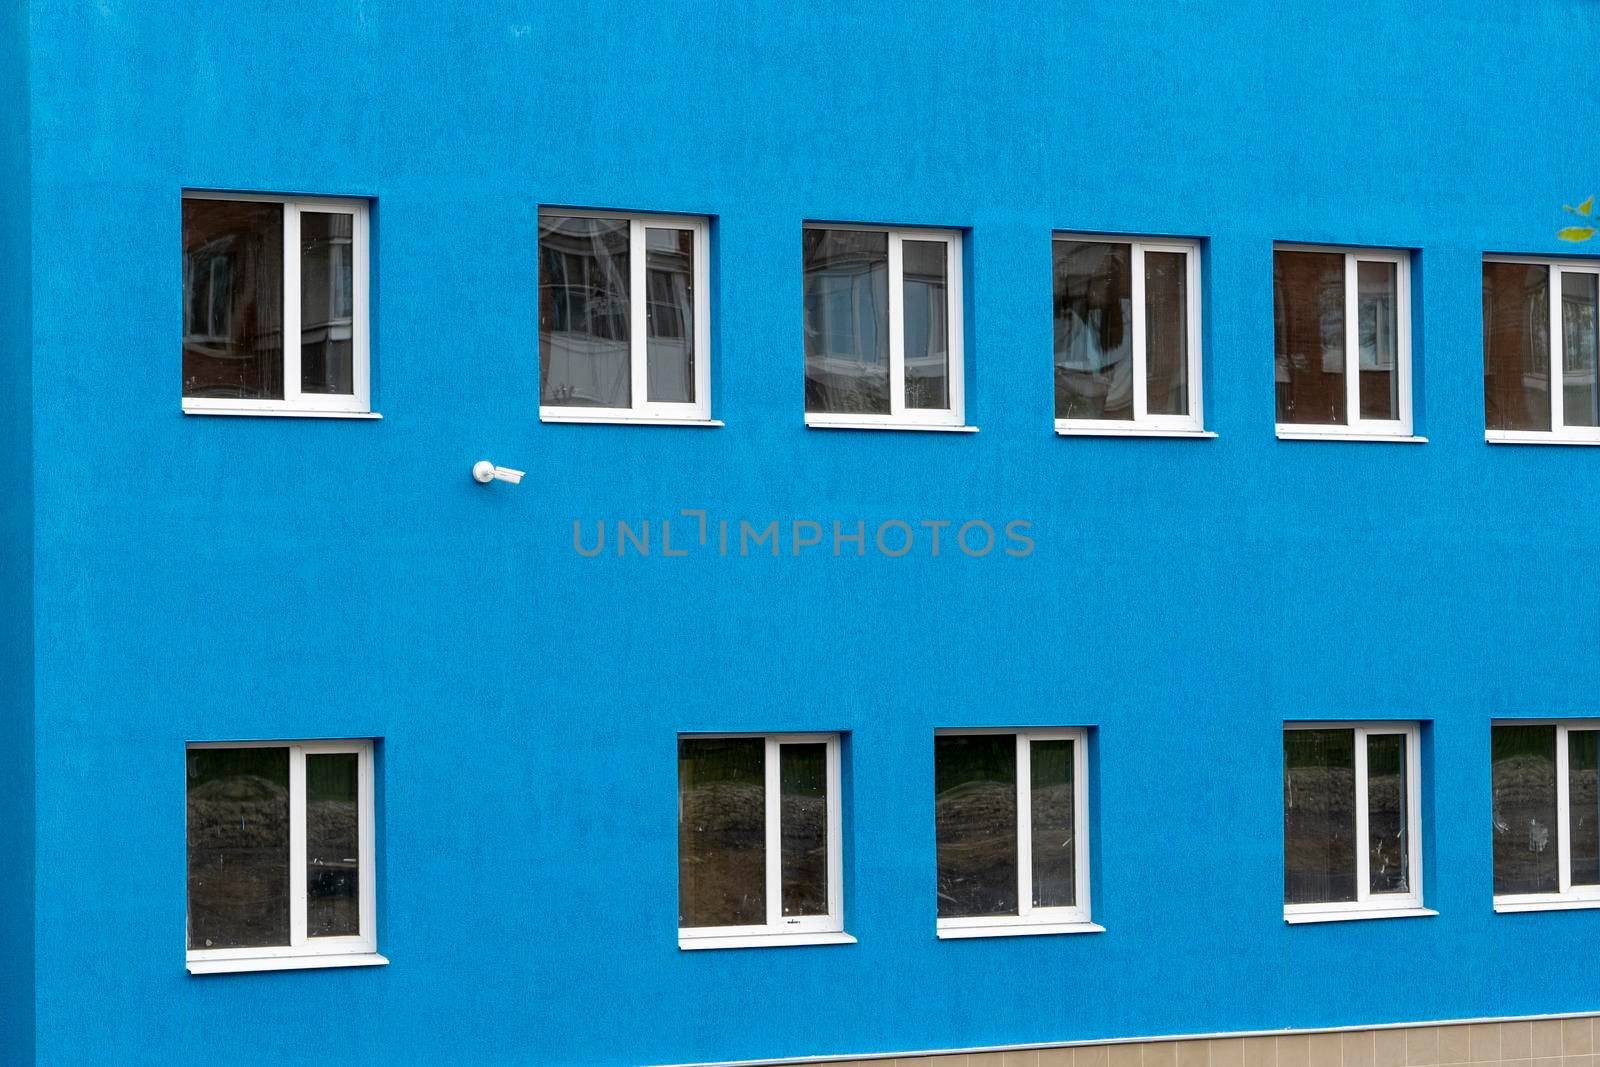 the wall of a new blue house with windows and a surveillance camera. by audiznam2609